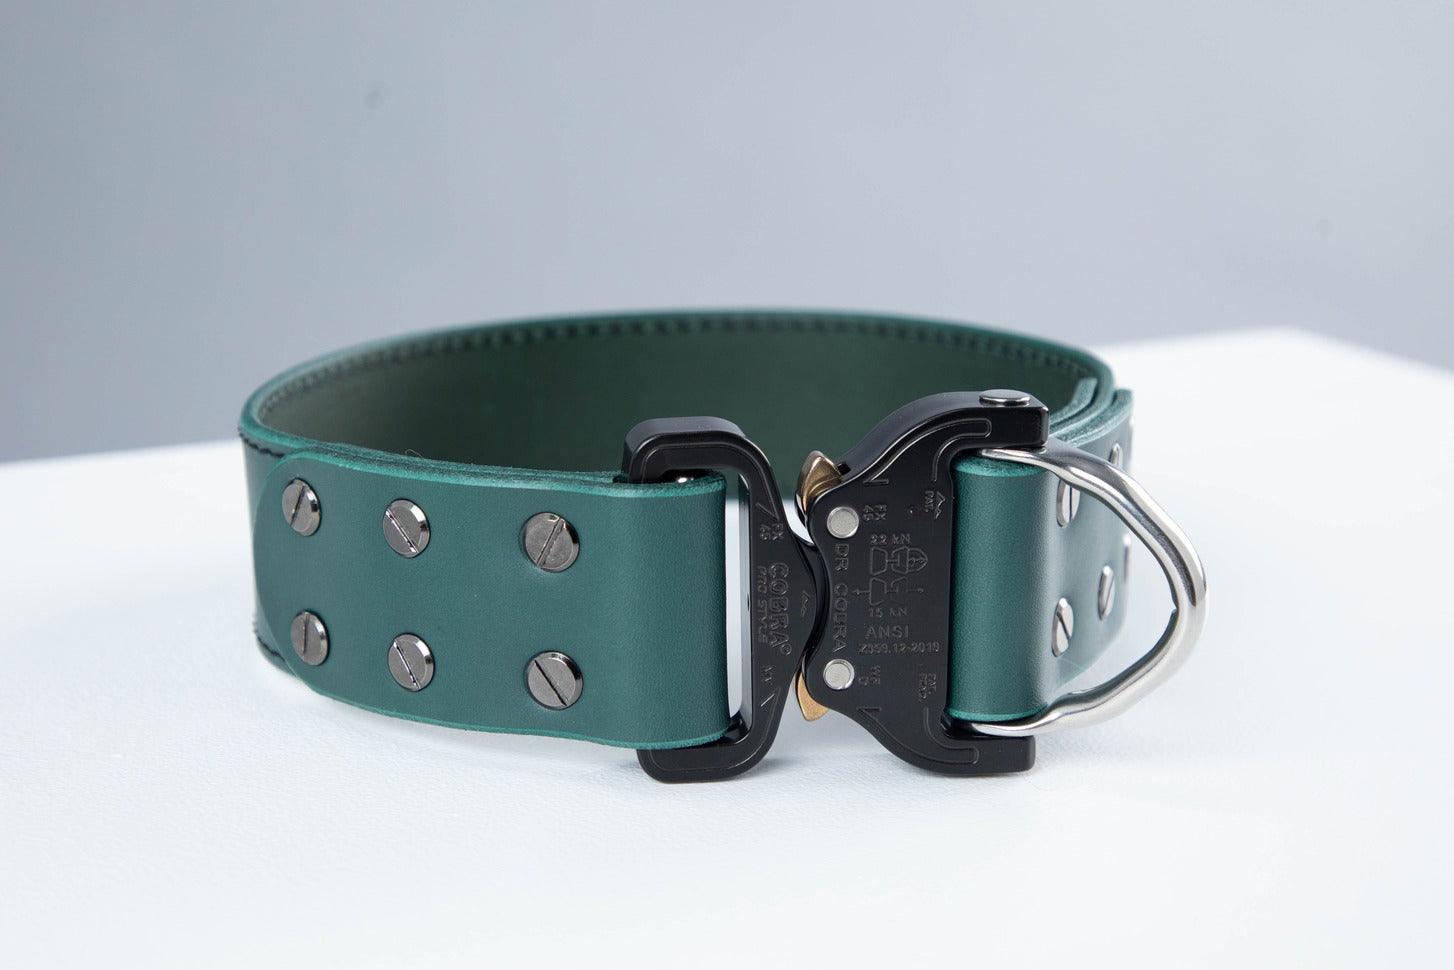 Green leather dog collar with COBRA® buckle - European handmade dog accessories by My Wild Other